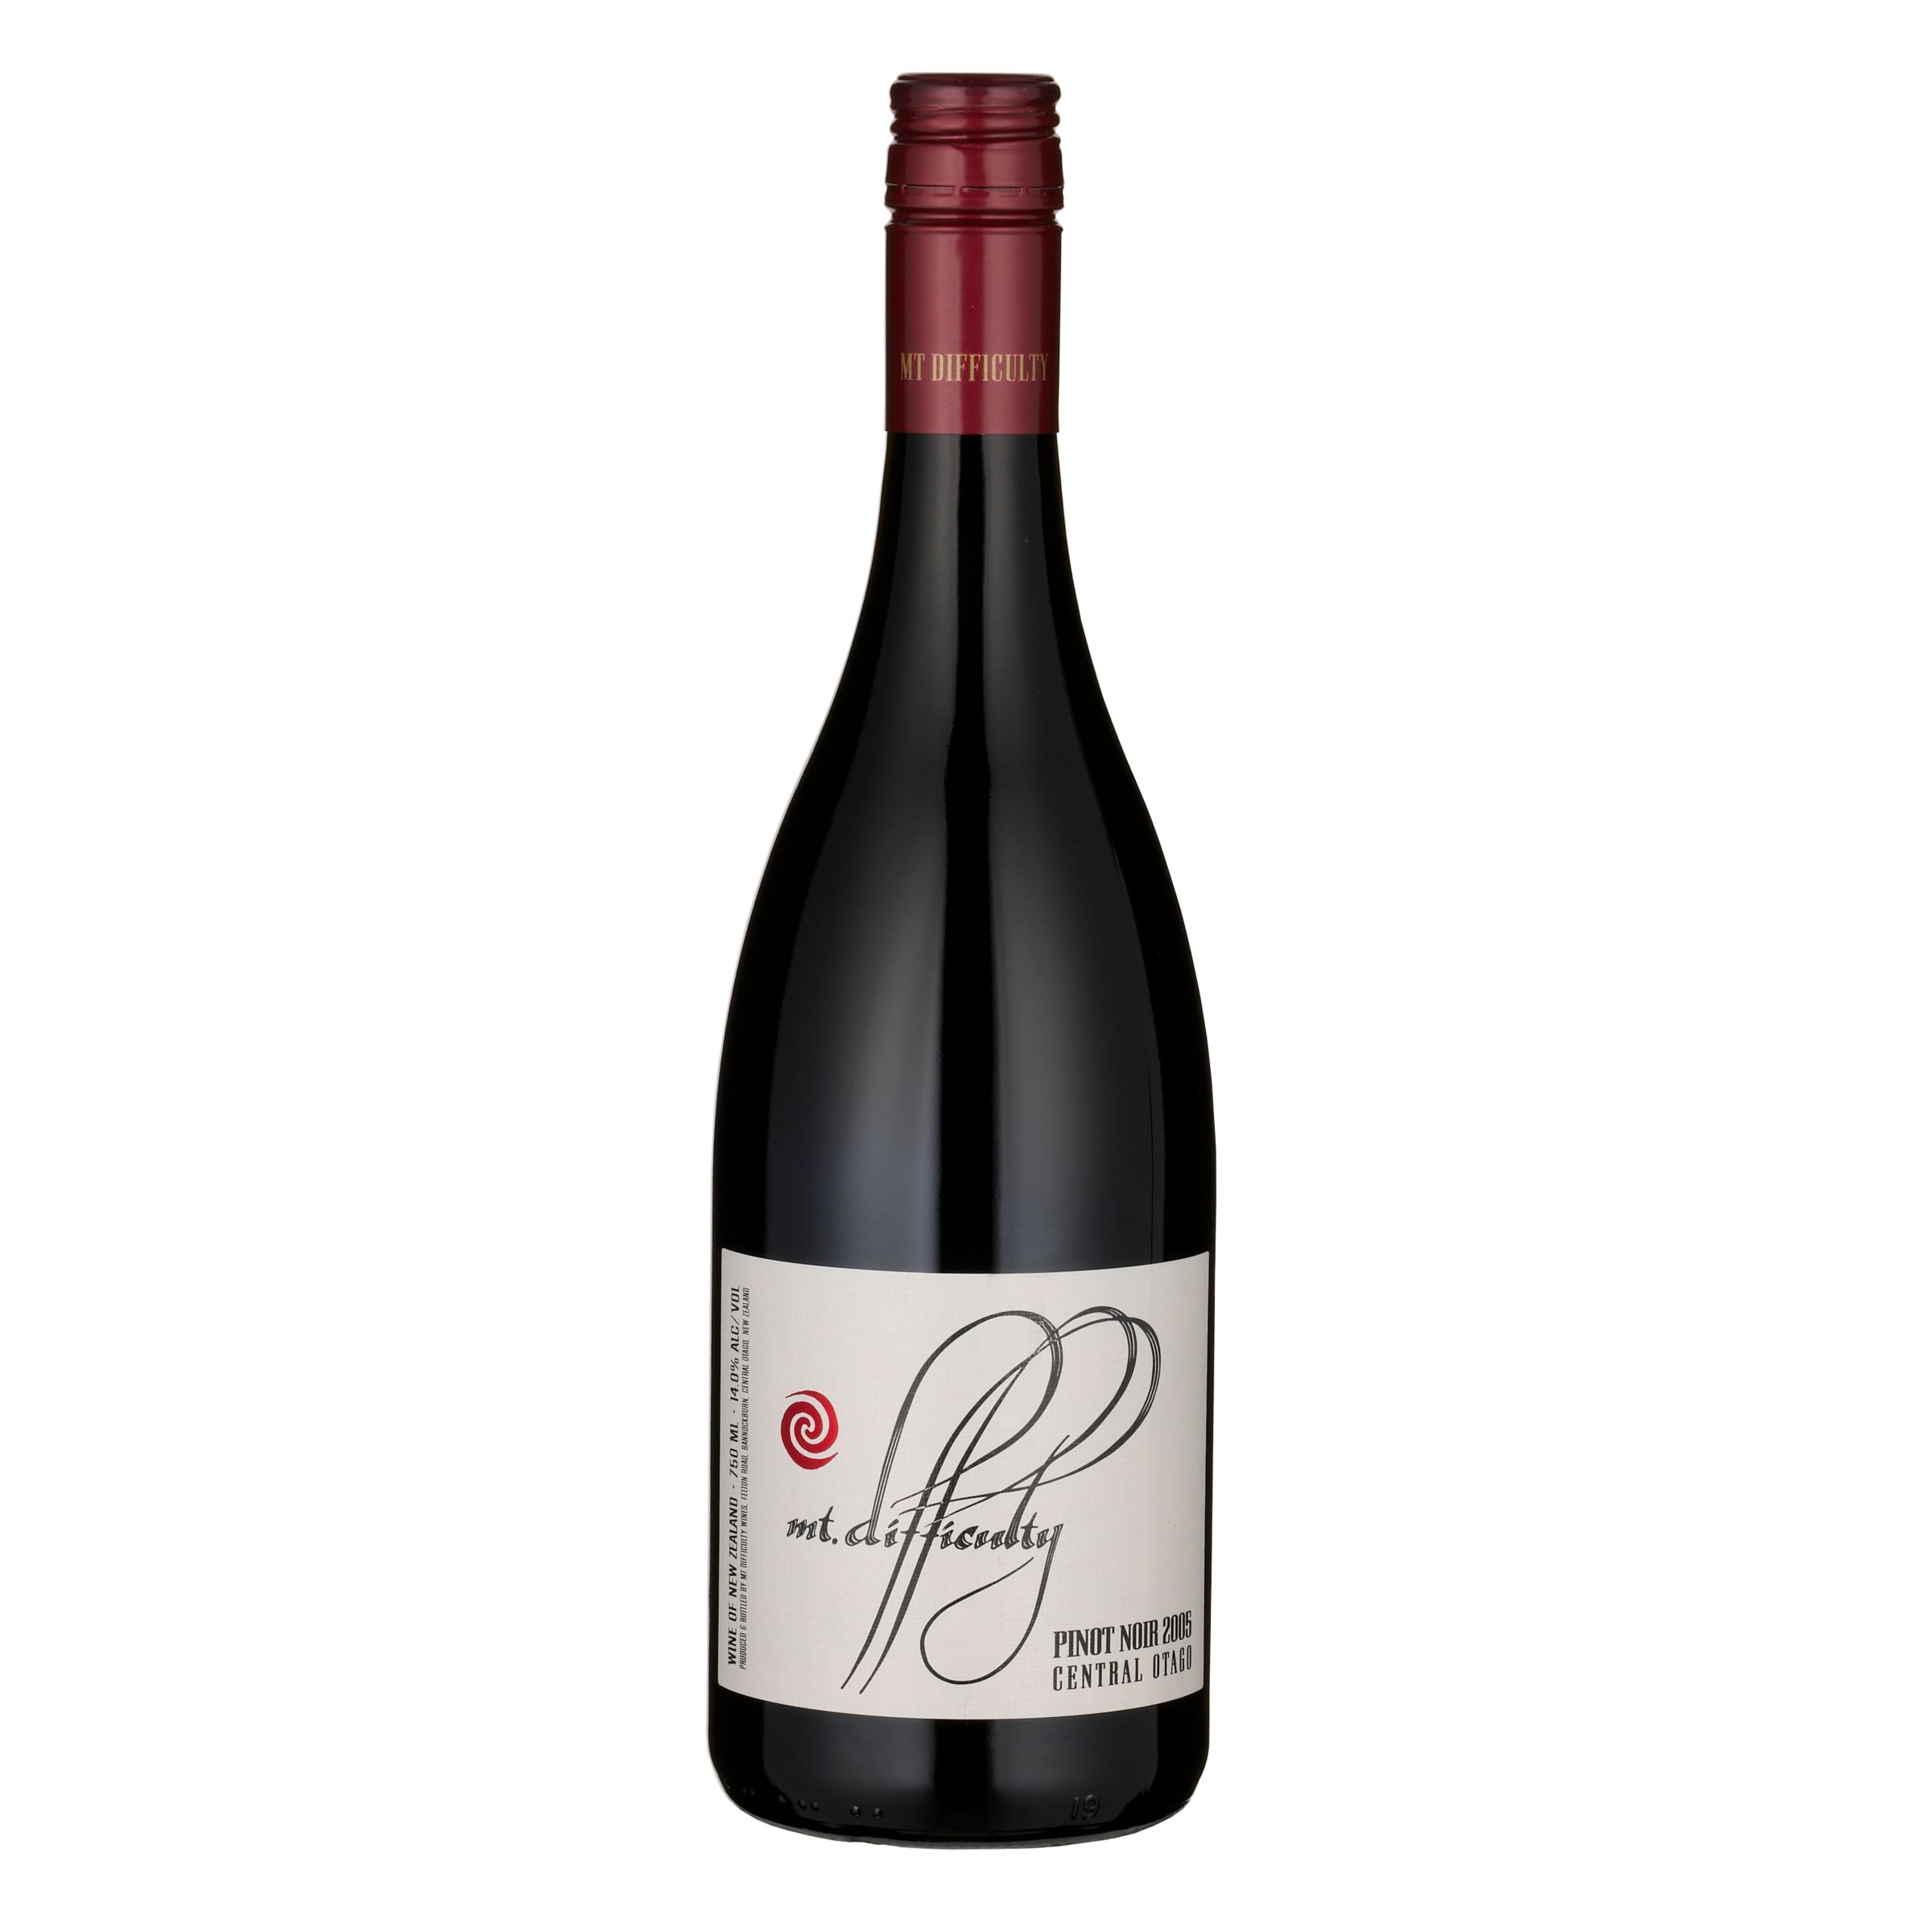 Mount Difficulty Pinot Noir 2008 Central Otago, New Zealand at John Lewis